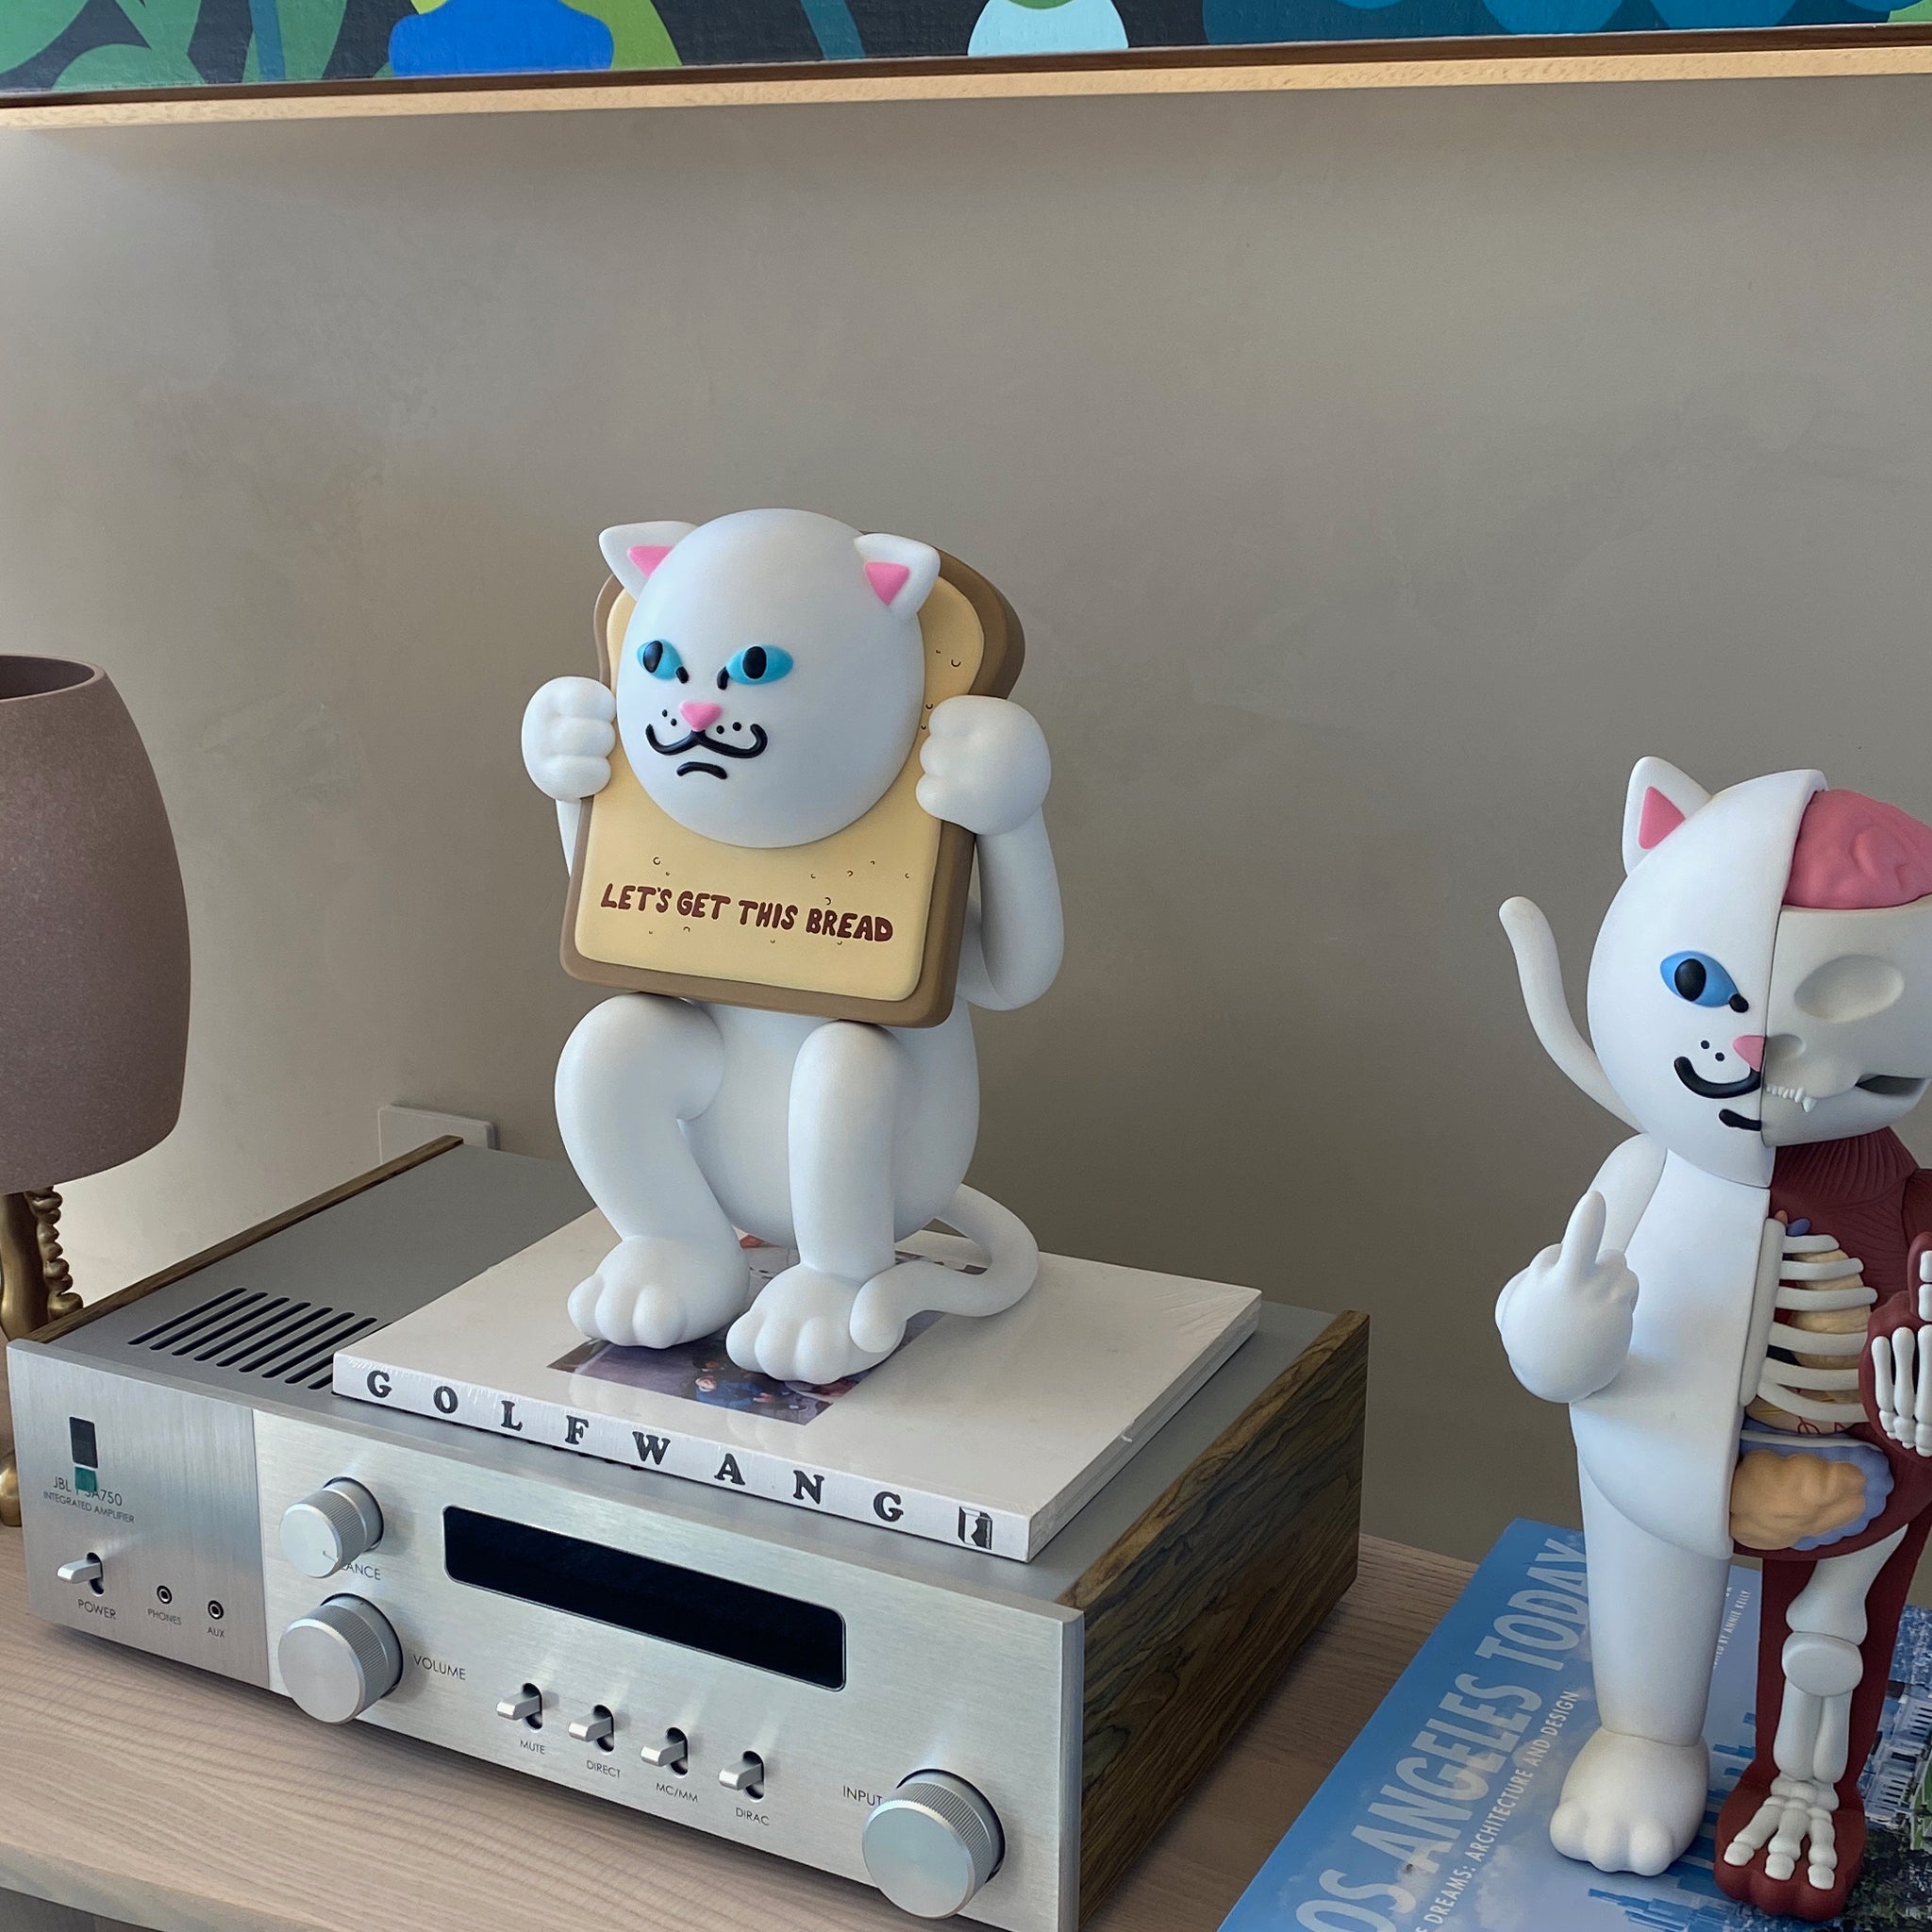 RIPNDIP Lets Get This Bread Toy